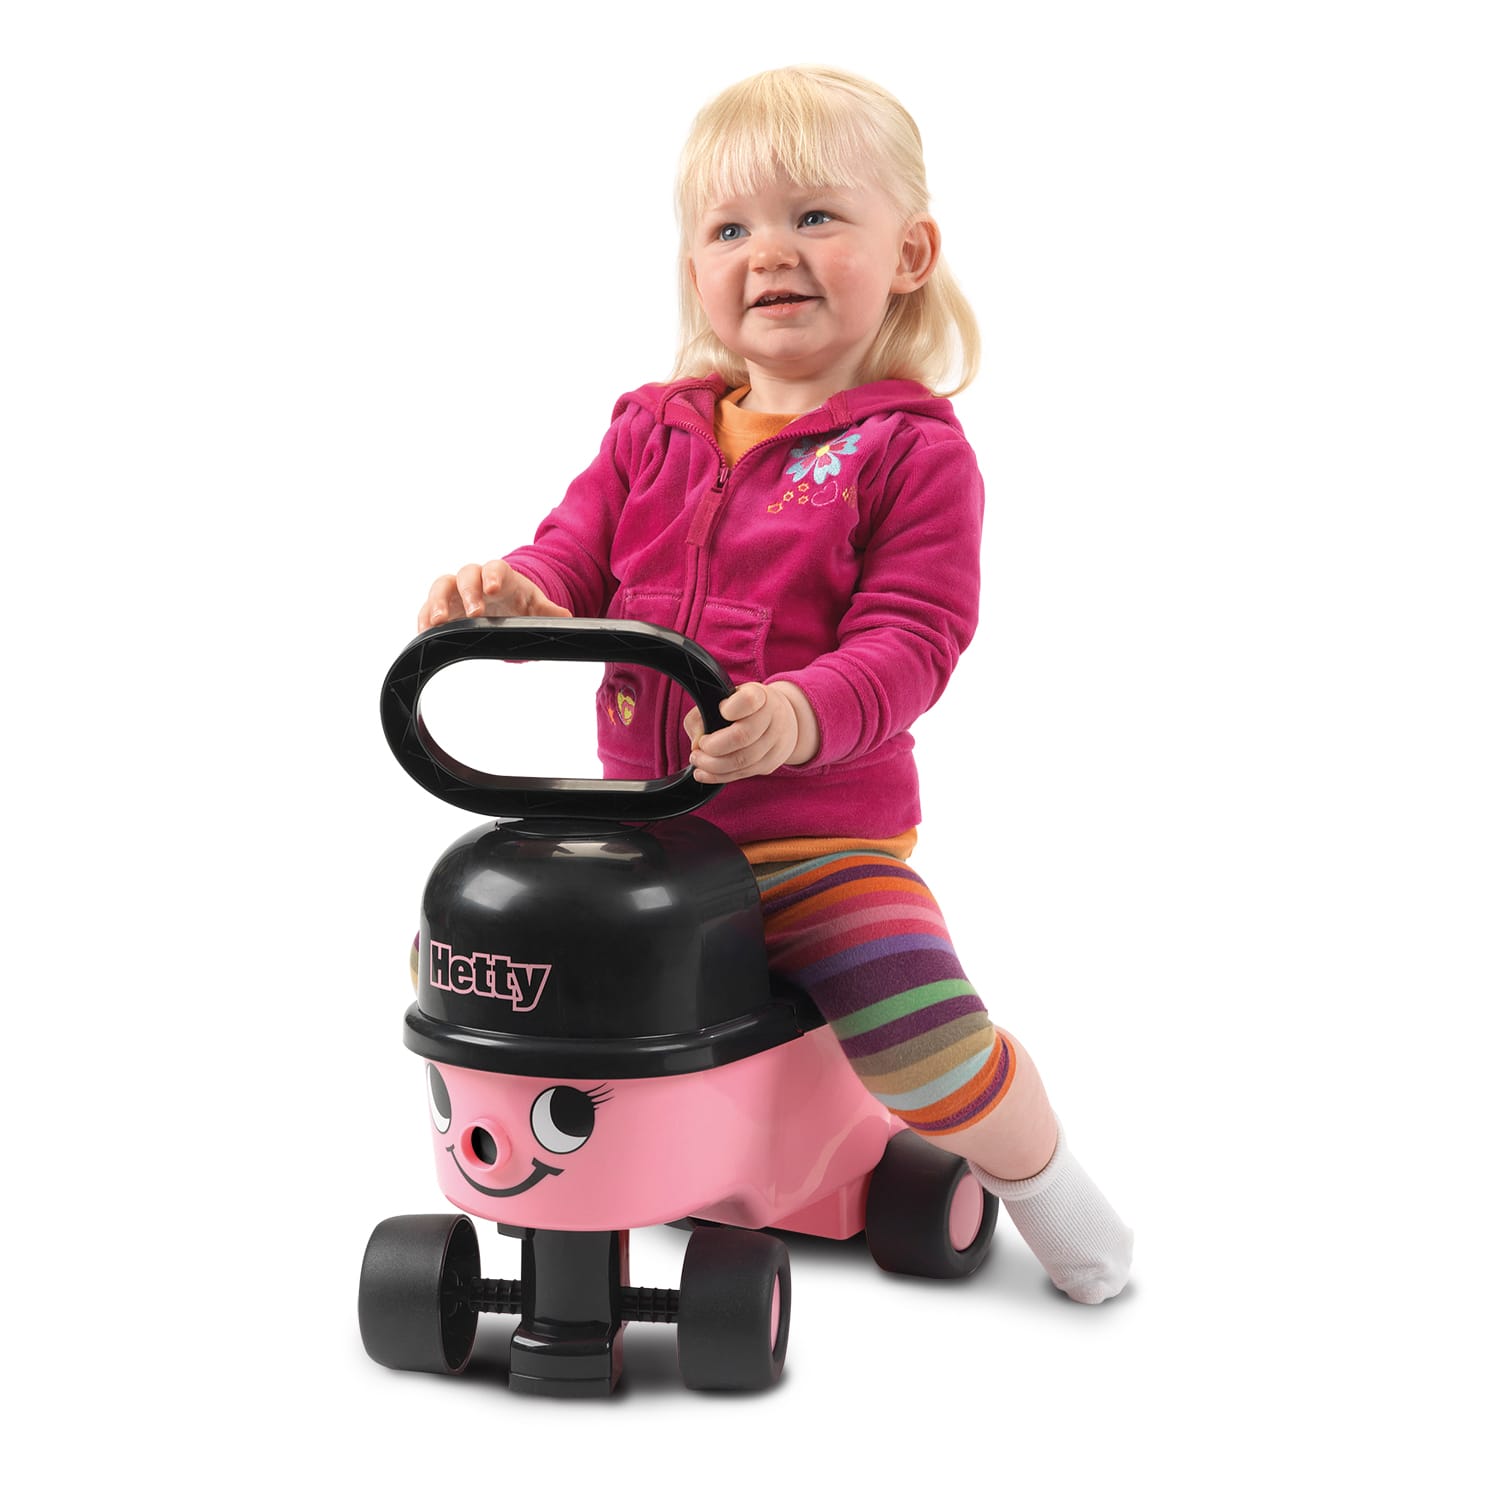 Casdon Hetty Sit and Ride Toy Baby Walker Age 12 Months Cas640 for sale online 